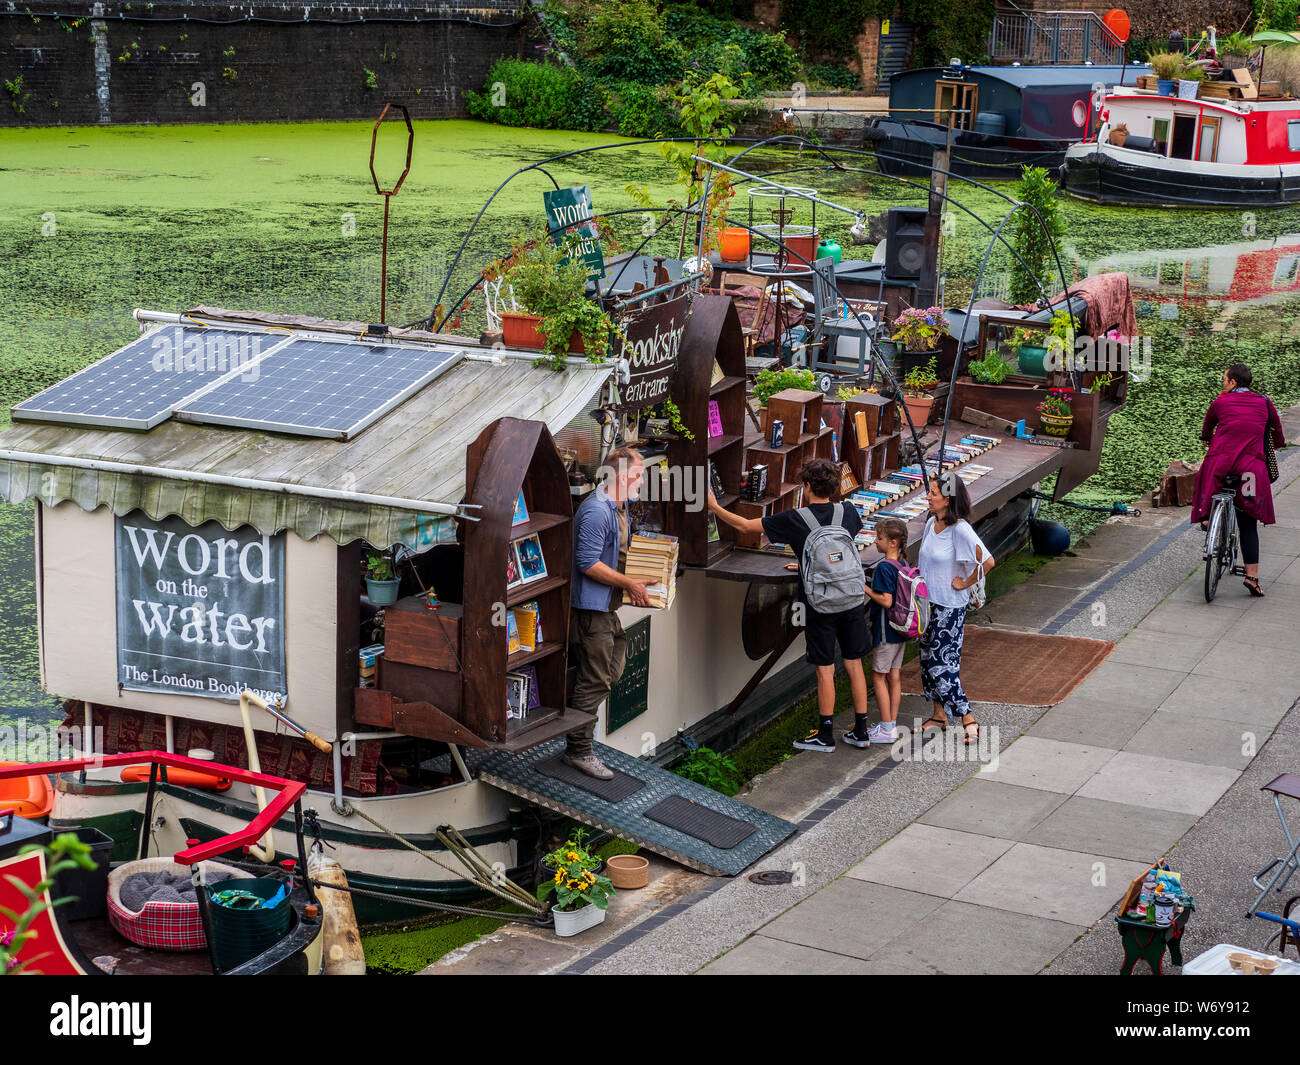 Das 'Word on the Water' schwimmende London Book Barge auf Londons Regents Canal Towpath neben dem Granary Square Bebauung bei Kings Cross Station. Stockfoto